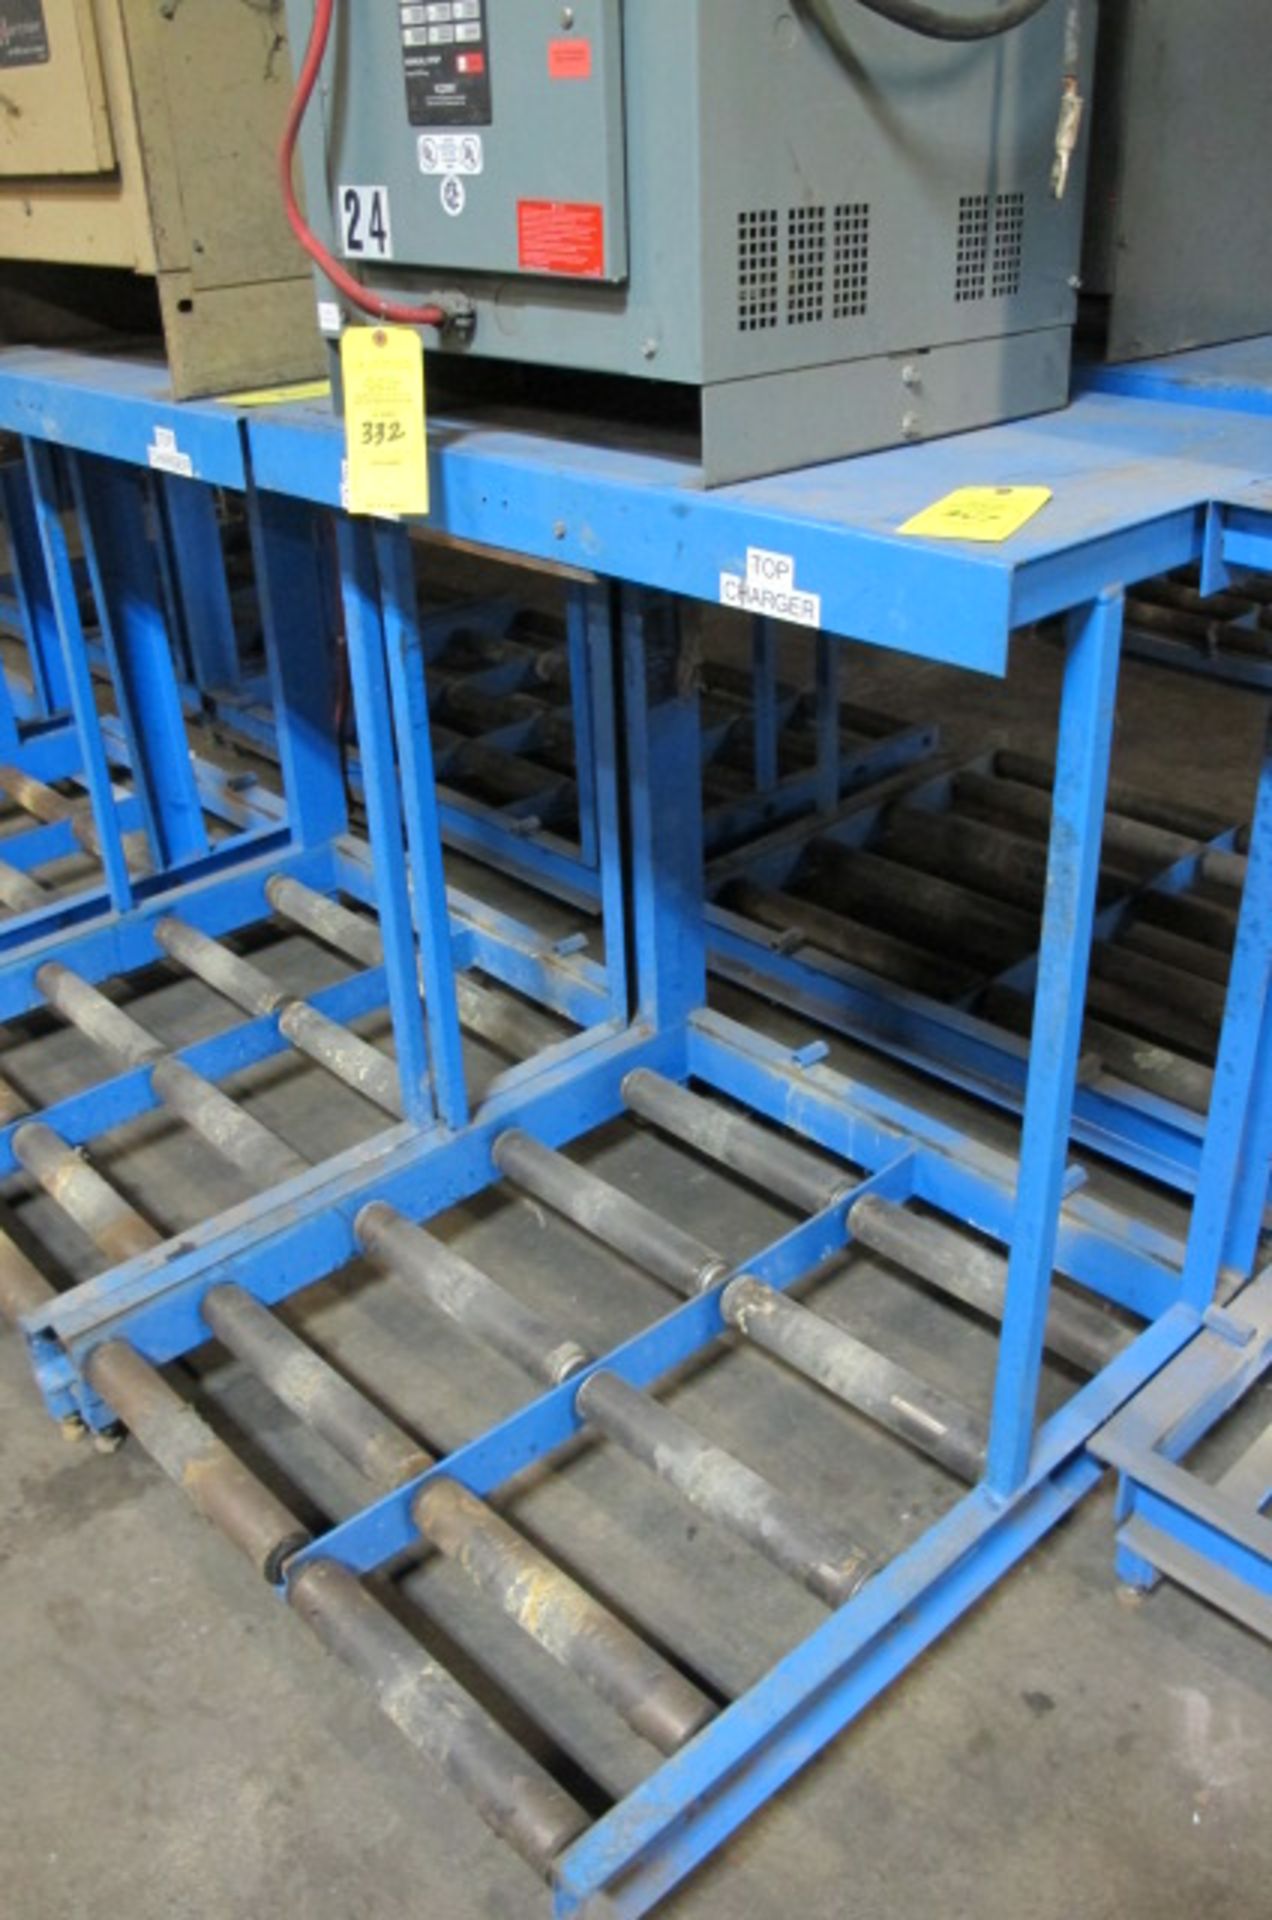 ASSORTED BATTERY CHARGING STATIONS 7695 OH 120, Lyons, Ohio 43523 - all Gaylord plastic pallets